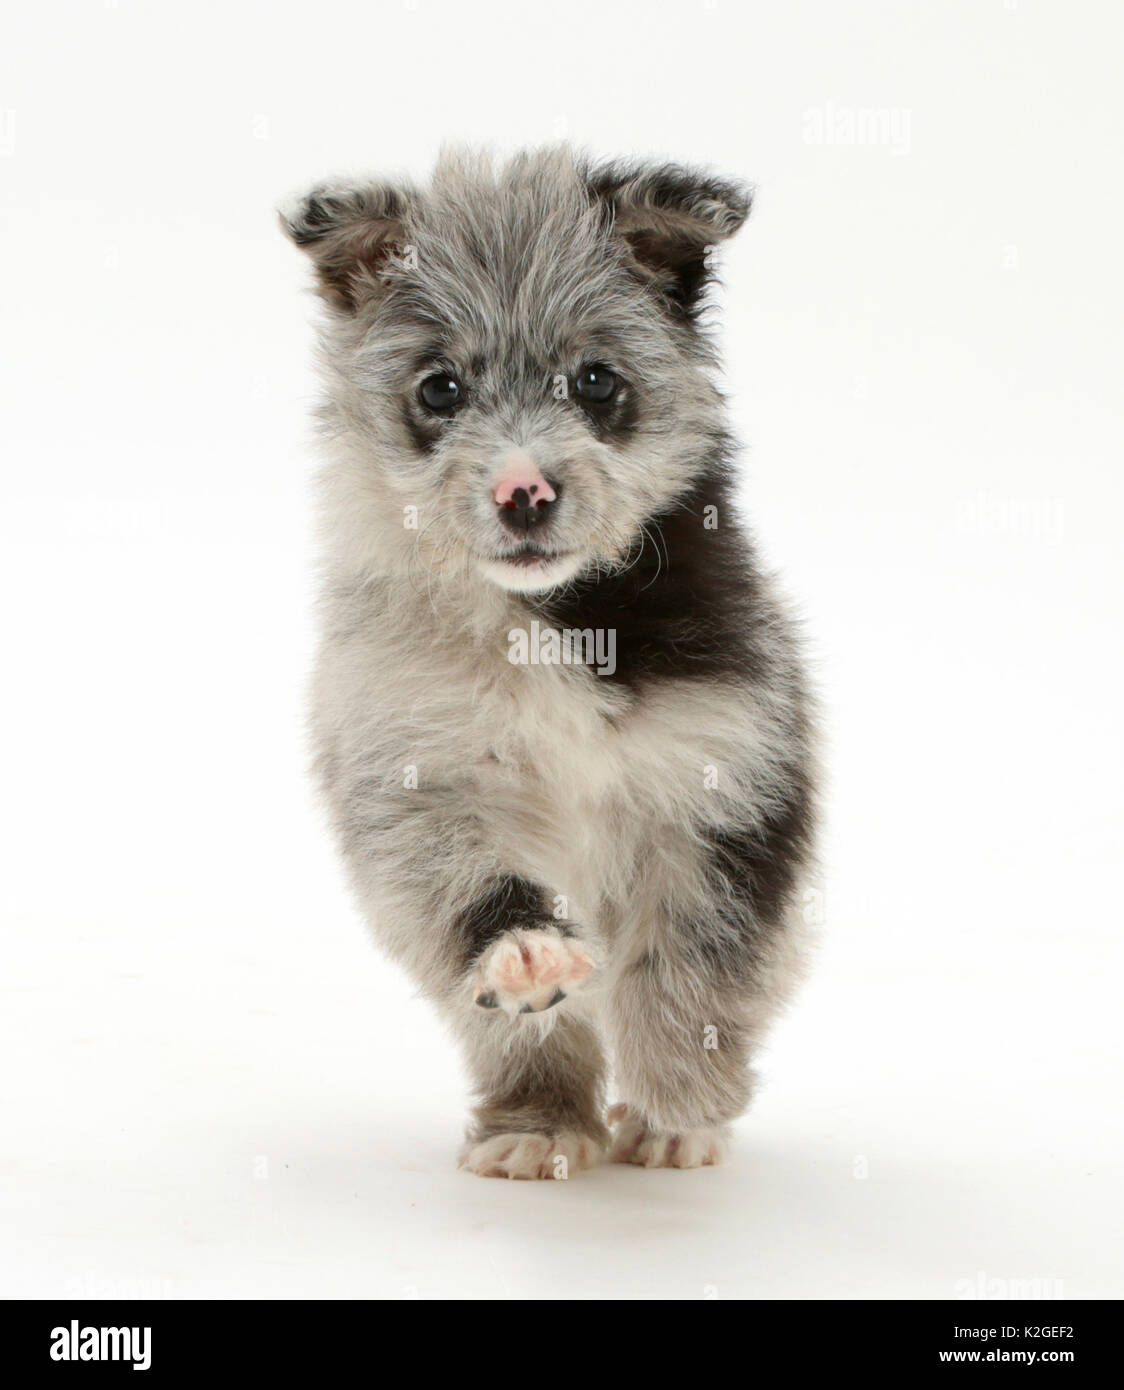 ChiPoo puppy, Chihuahua cross Poodle, Roxy, age 12 weeks, running. Stock Photo